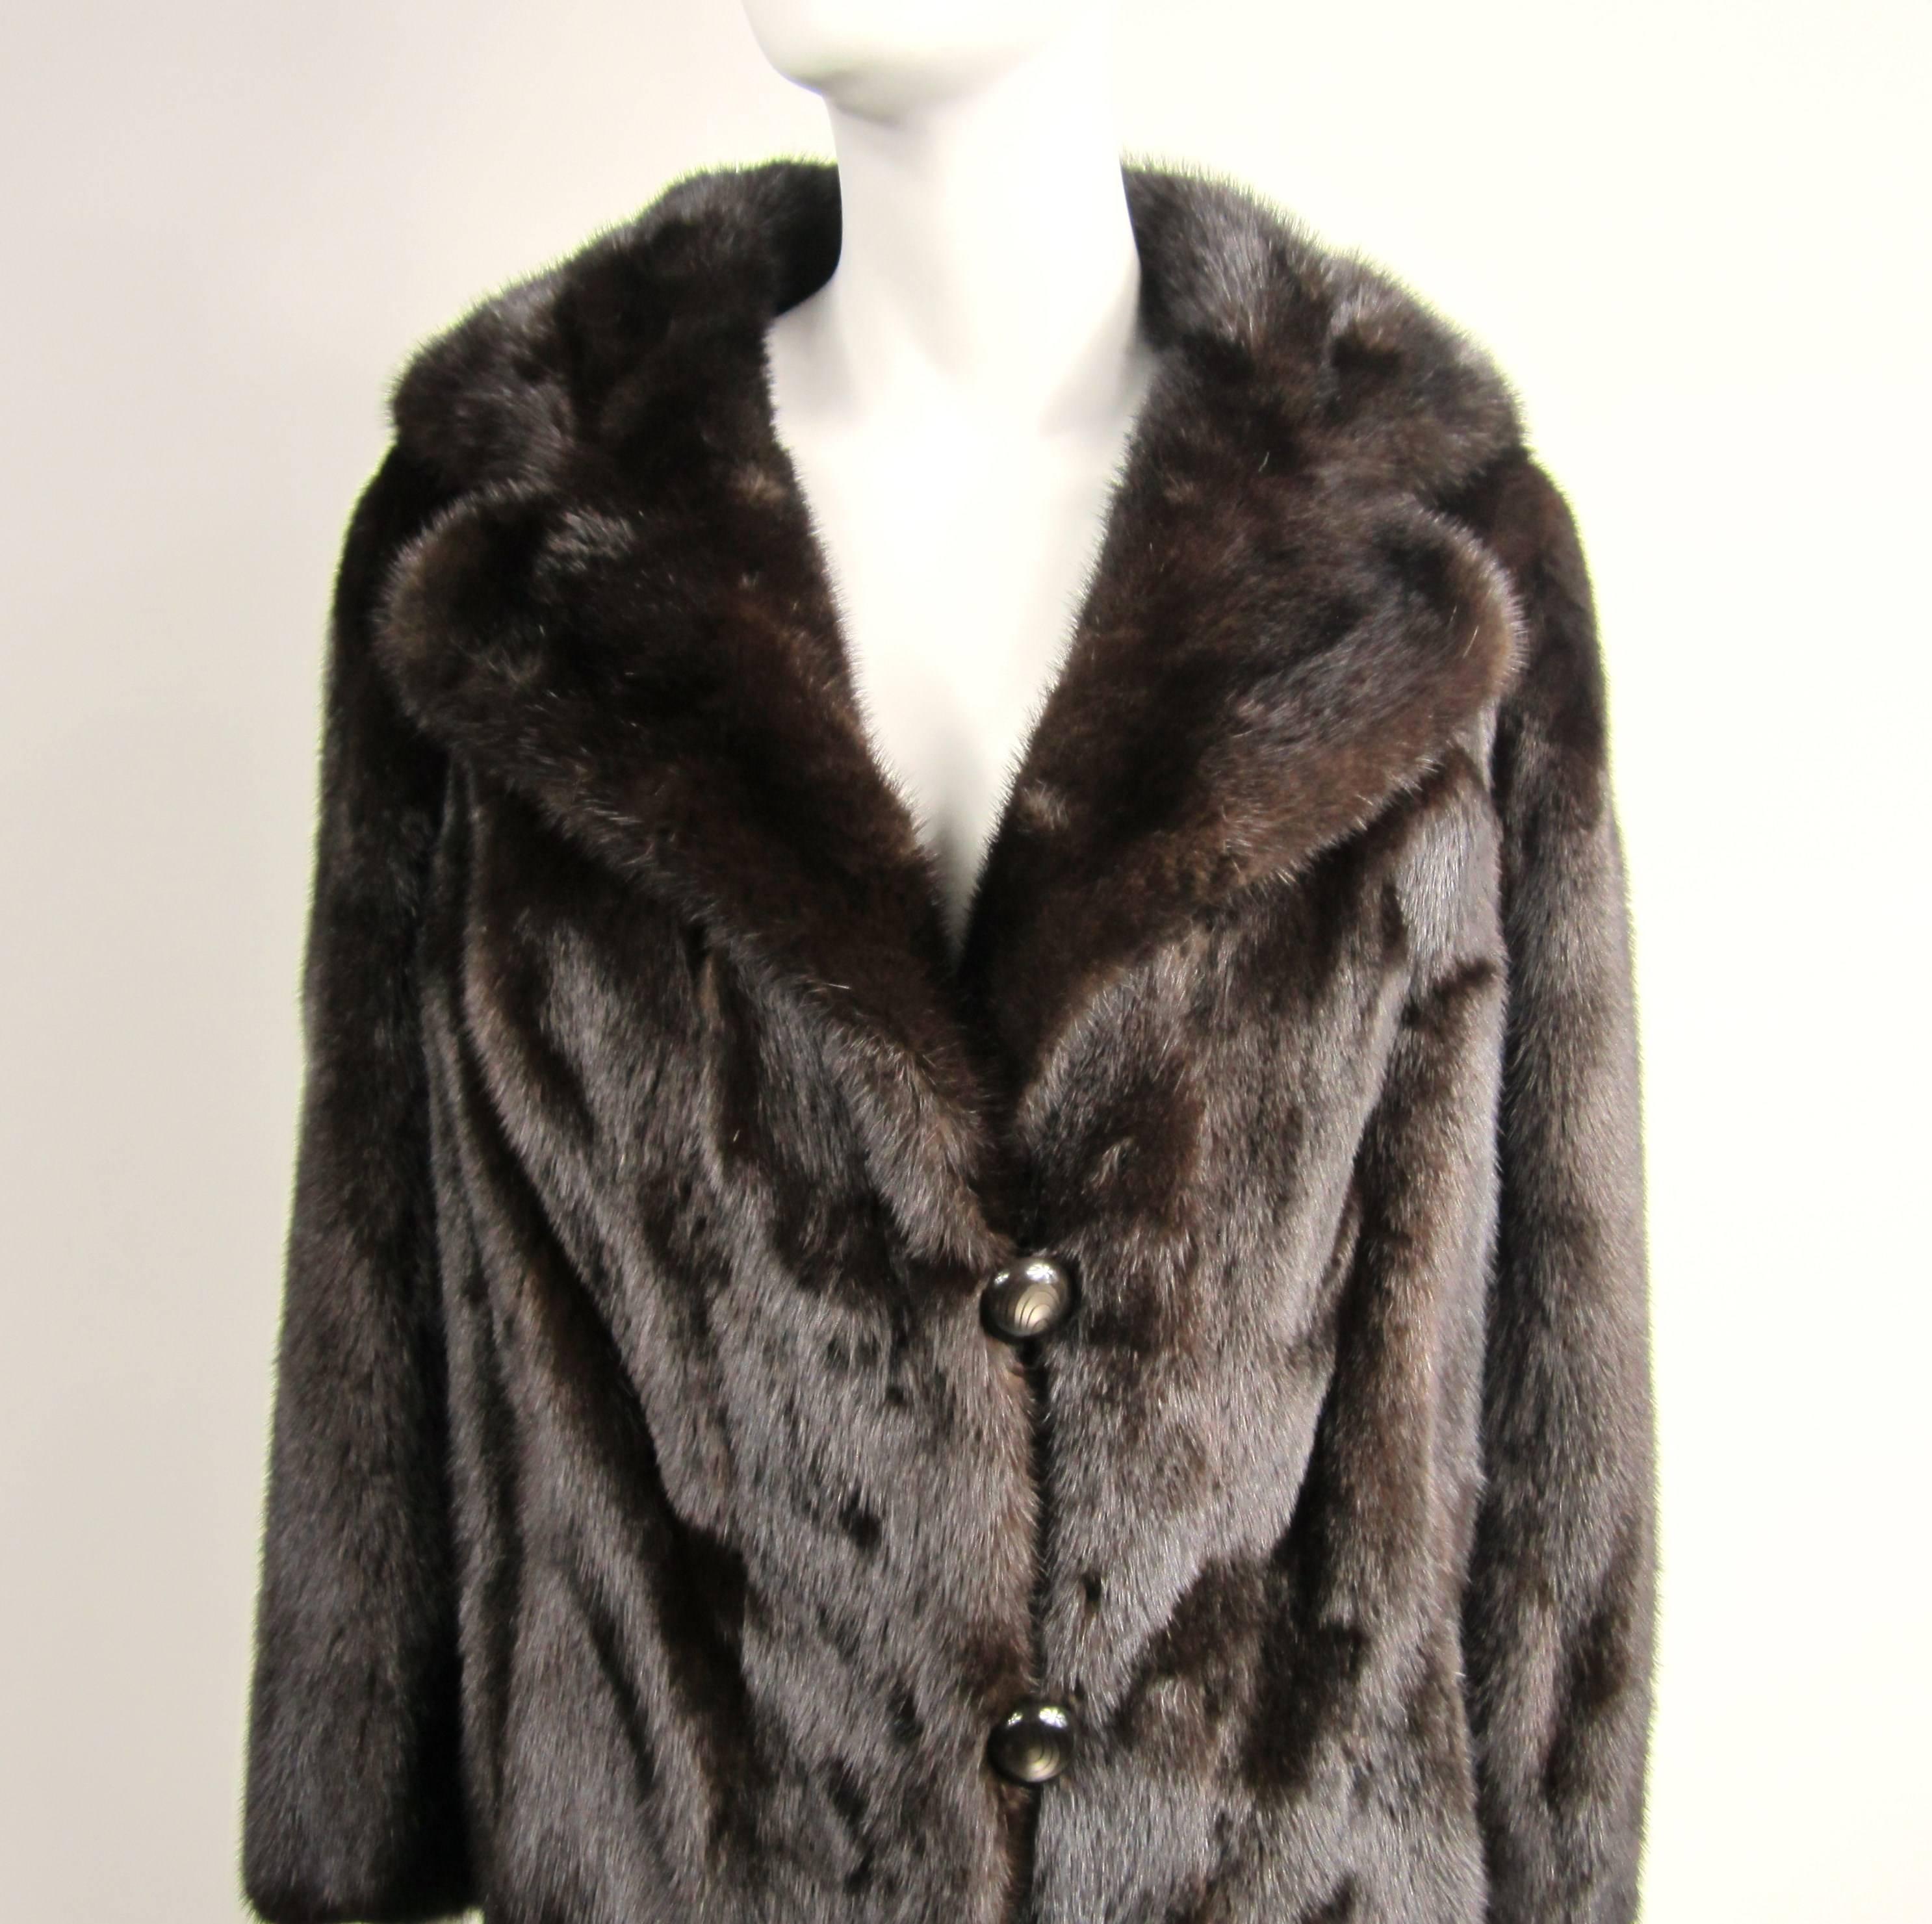 Perfect for any occasion. M Blaustein Mink that can be wear with your finest or with jeans. 2 slit pockets / 2 button closure Soft and supple mink  
Measuring approx. Up to 42 inch chest/ Up to 42 inch waist / Length is 25 inch  down the back /